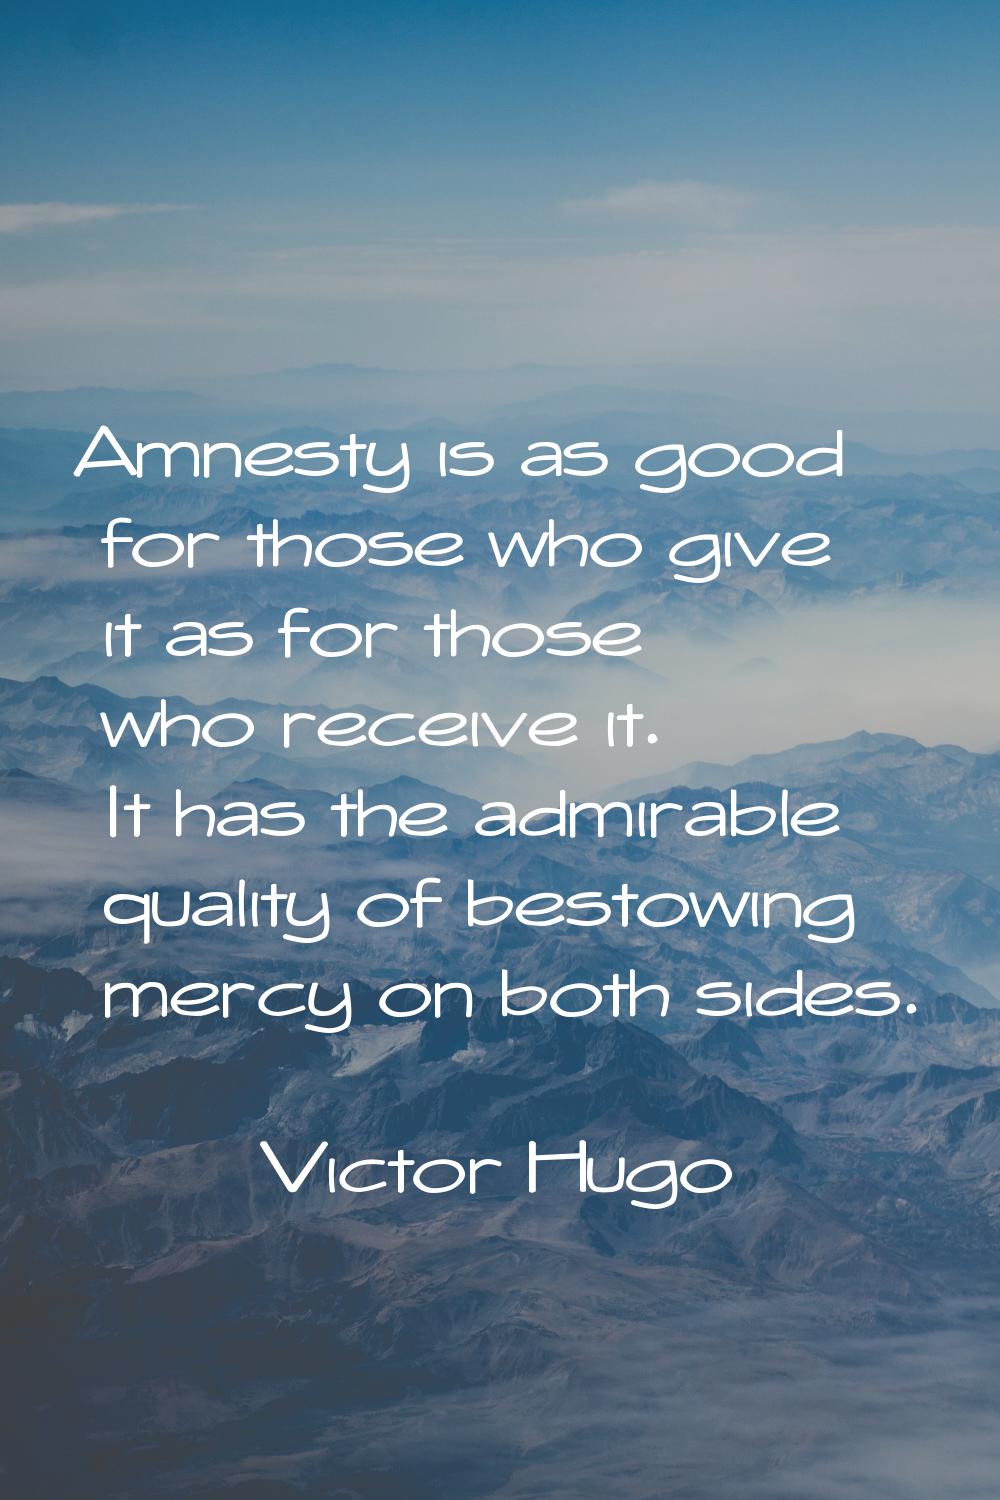 Amnesty is as good for those who give it as for those who receive it. It has the admirable quality 